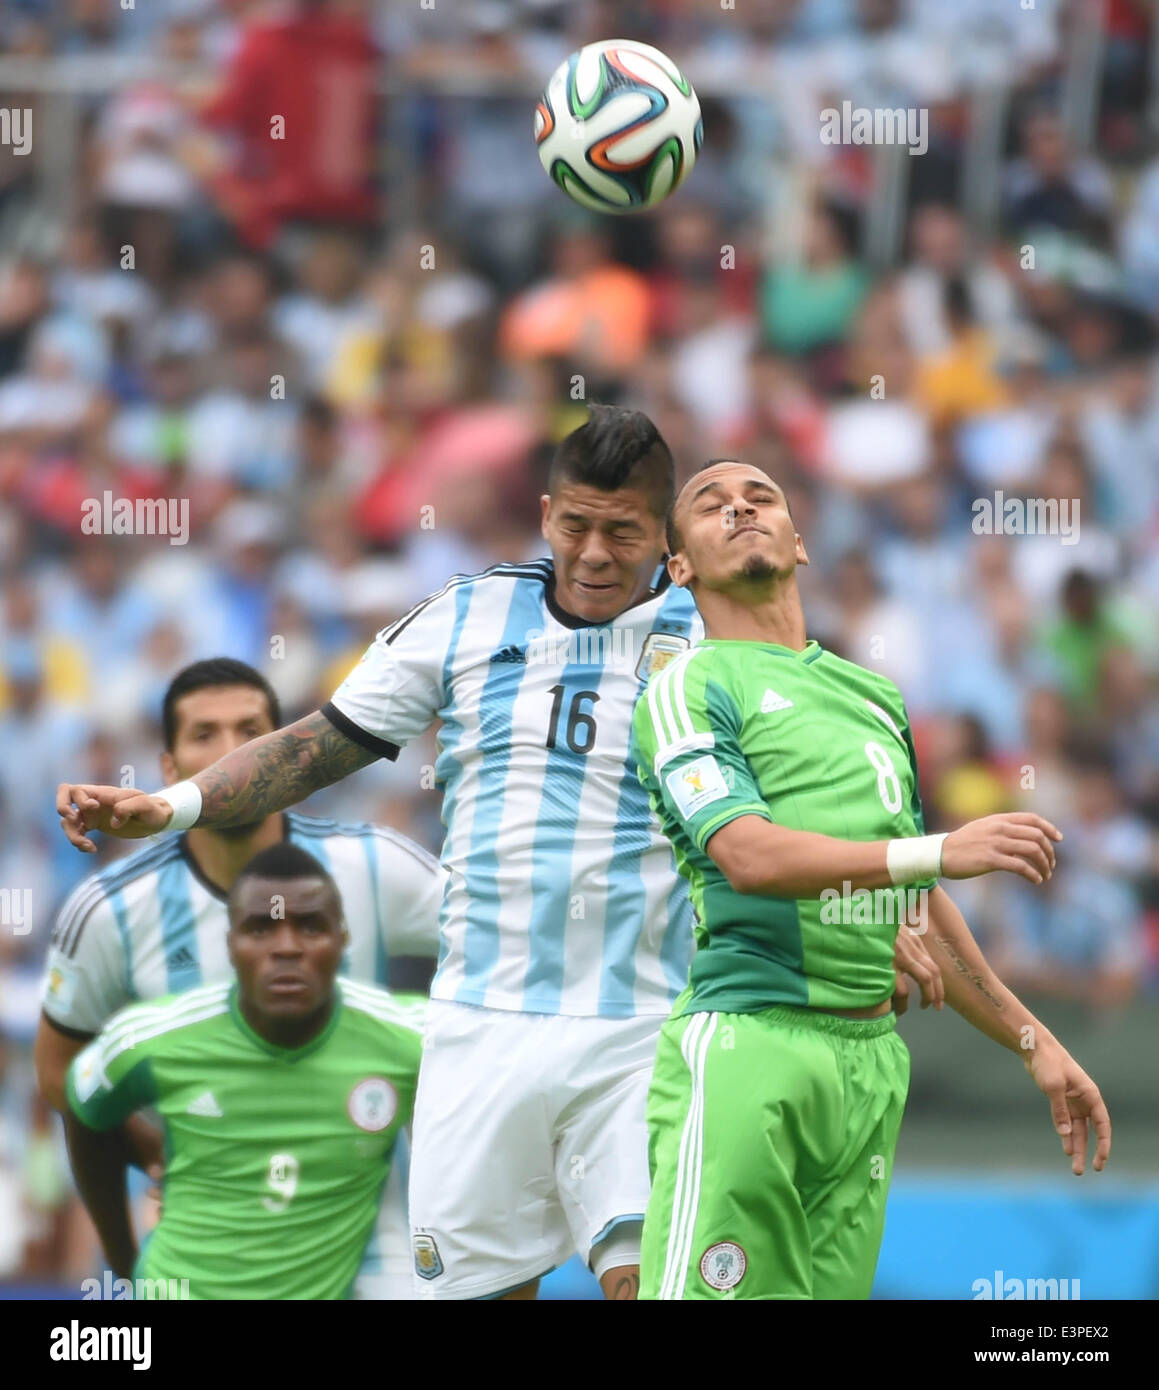 Porto Alegre, Brazil. 25th June, 2014. Argentina's Marcos Rojo (2nd R) competes for a header with Nigeria's Peter Osaze Odemwingie (1st R)during a Group F match between Nigeria and Argentina of 2014 FIFA World Cup at the Estadio Beira-Rio Stadium in Porto Alegre, Brazil, on June 25, 2014. Argentina won 3-2 over Nigeria on Wednesday. © Li Ga/Xinhua/Alamy Live News Stock Photo